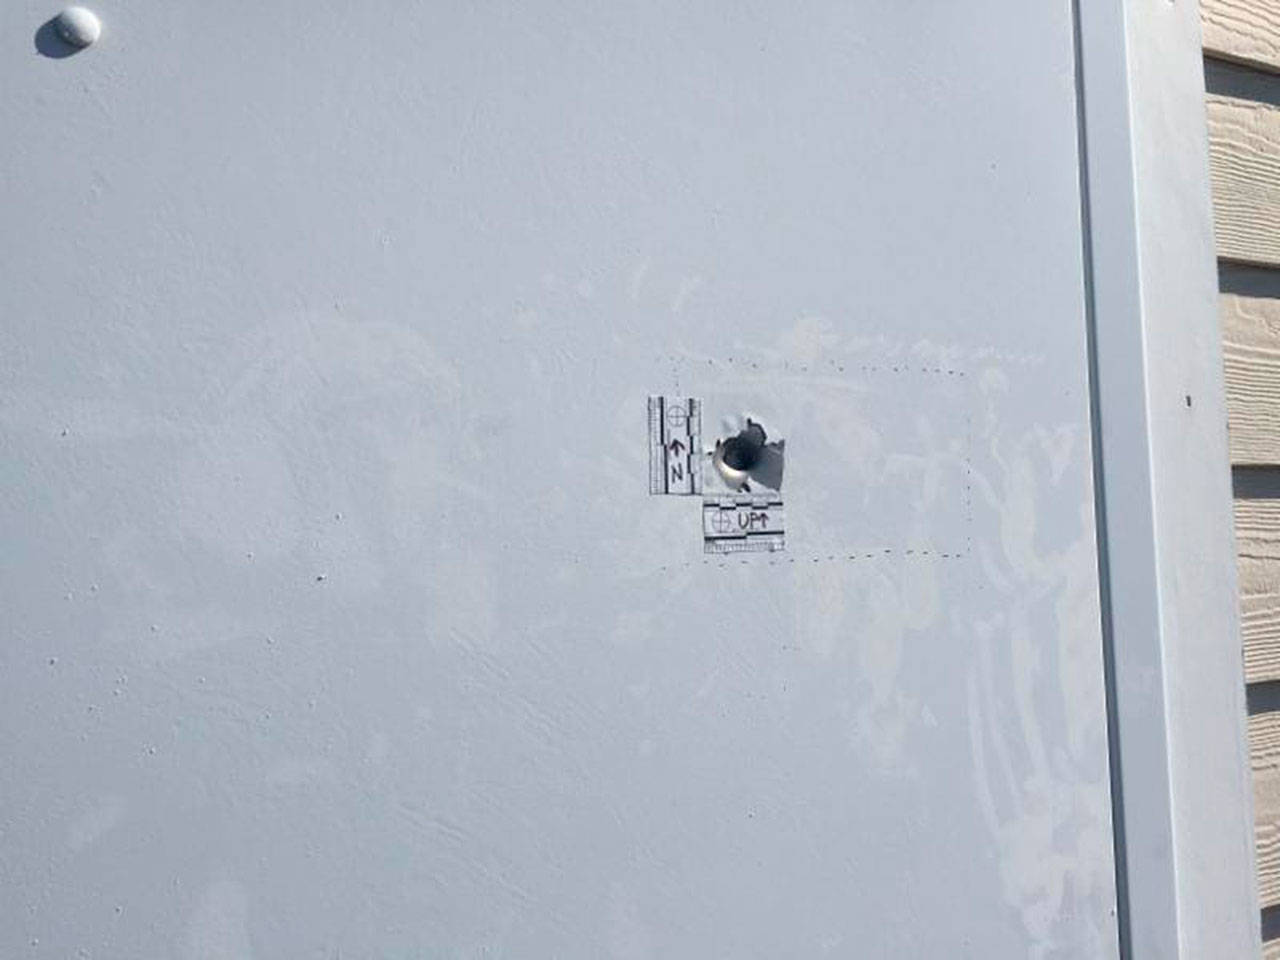 Bullets were shot at Sumner’s City Hall and police patrol cars last week. Submitted image